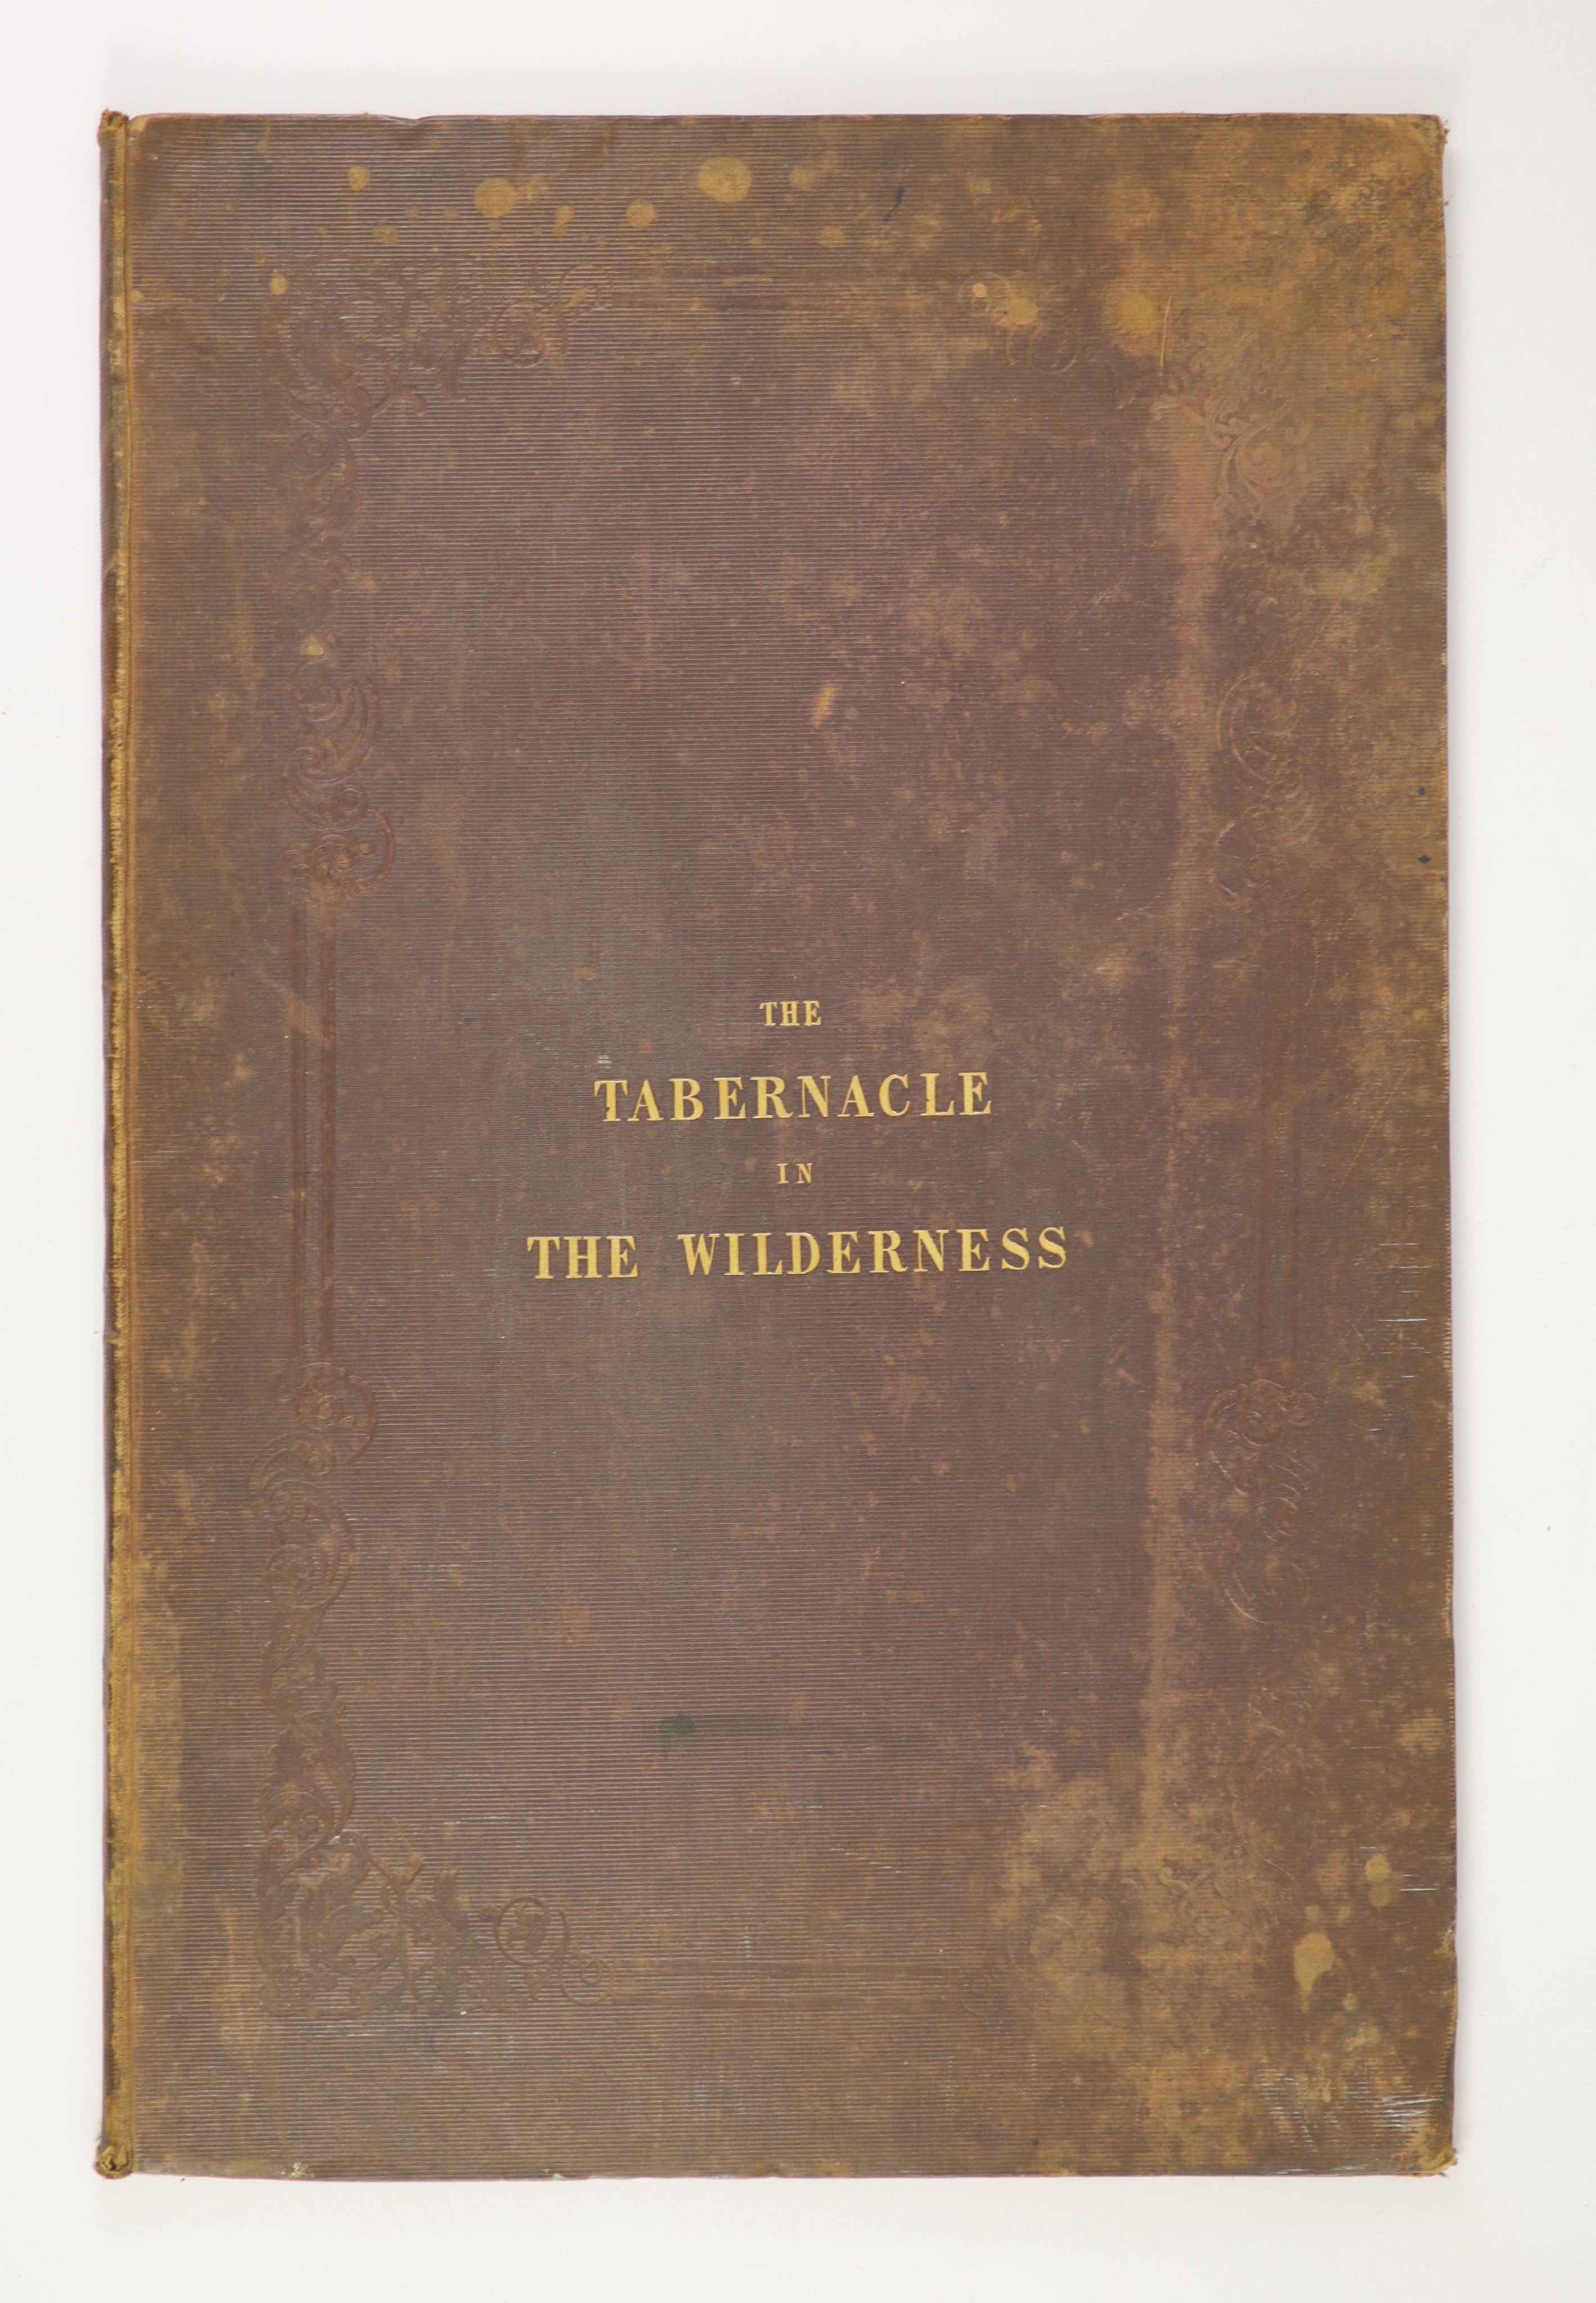 Rhind, W.G - The Tabernacle in the Wilderness, 3rd edition, folio, original cloth, with frontispiece and 3 hand-coloured plates, Samuel Bagster, London, 1844